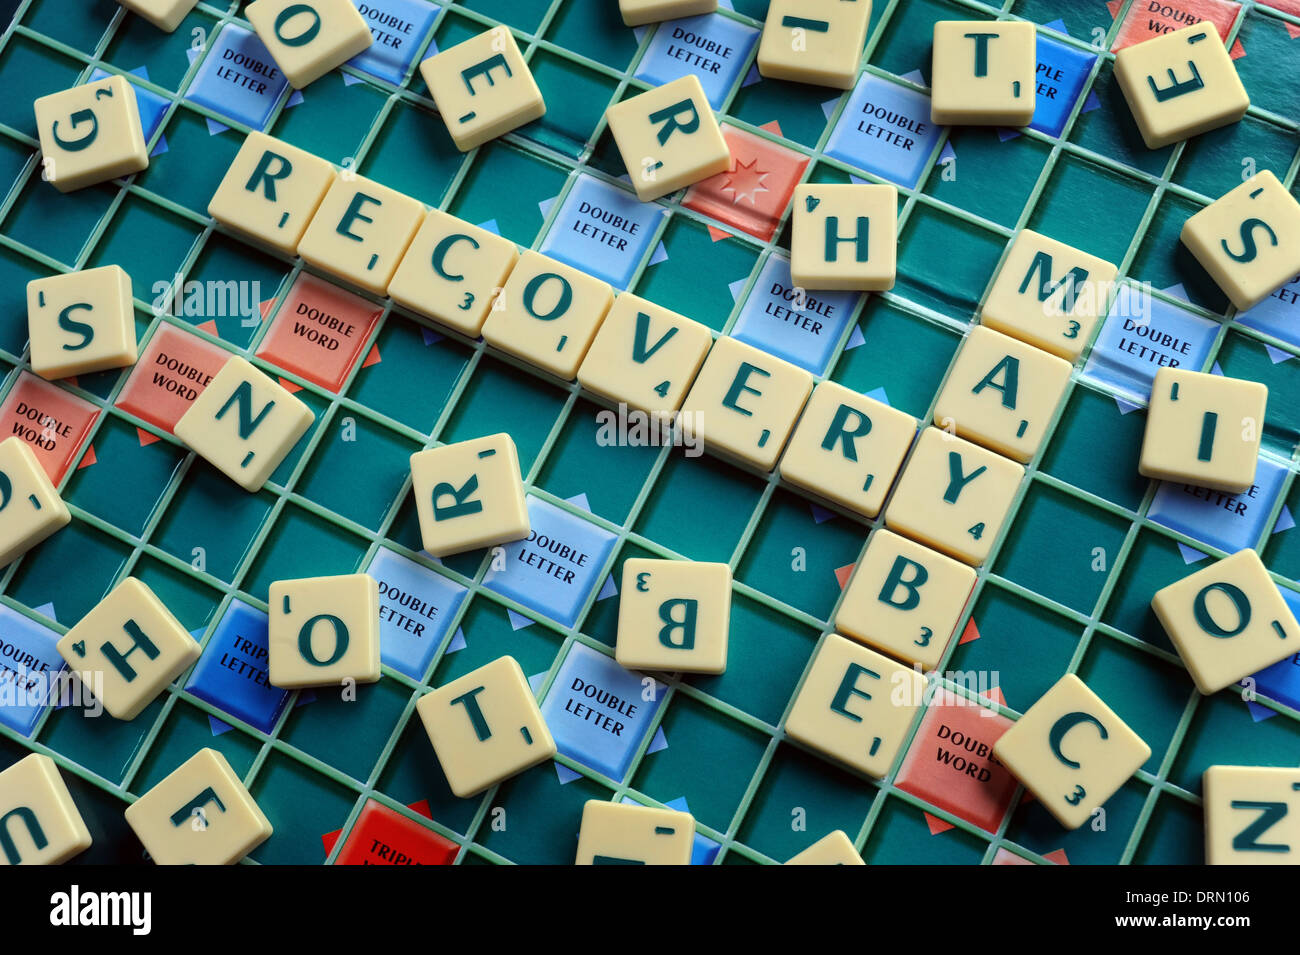 WORDS TILES SPELLING RECOVERY MAYBE RE THE ECONOMY MONEY SAVINGS INCOMES HOUSEHOLD BUDGETS FAMILY WAGES RECESSION CASH  UK Stock Photo